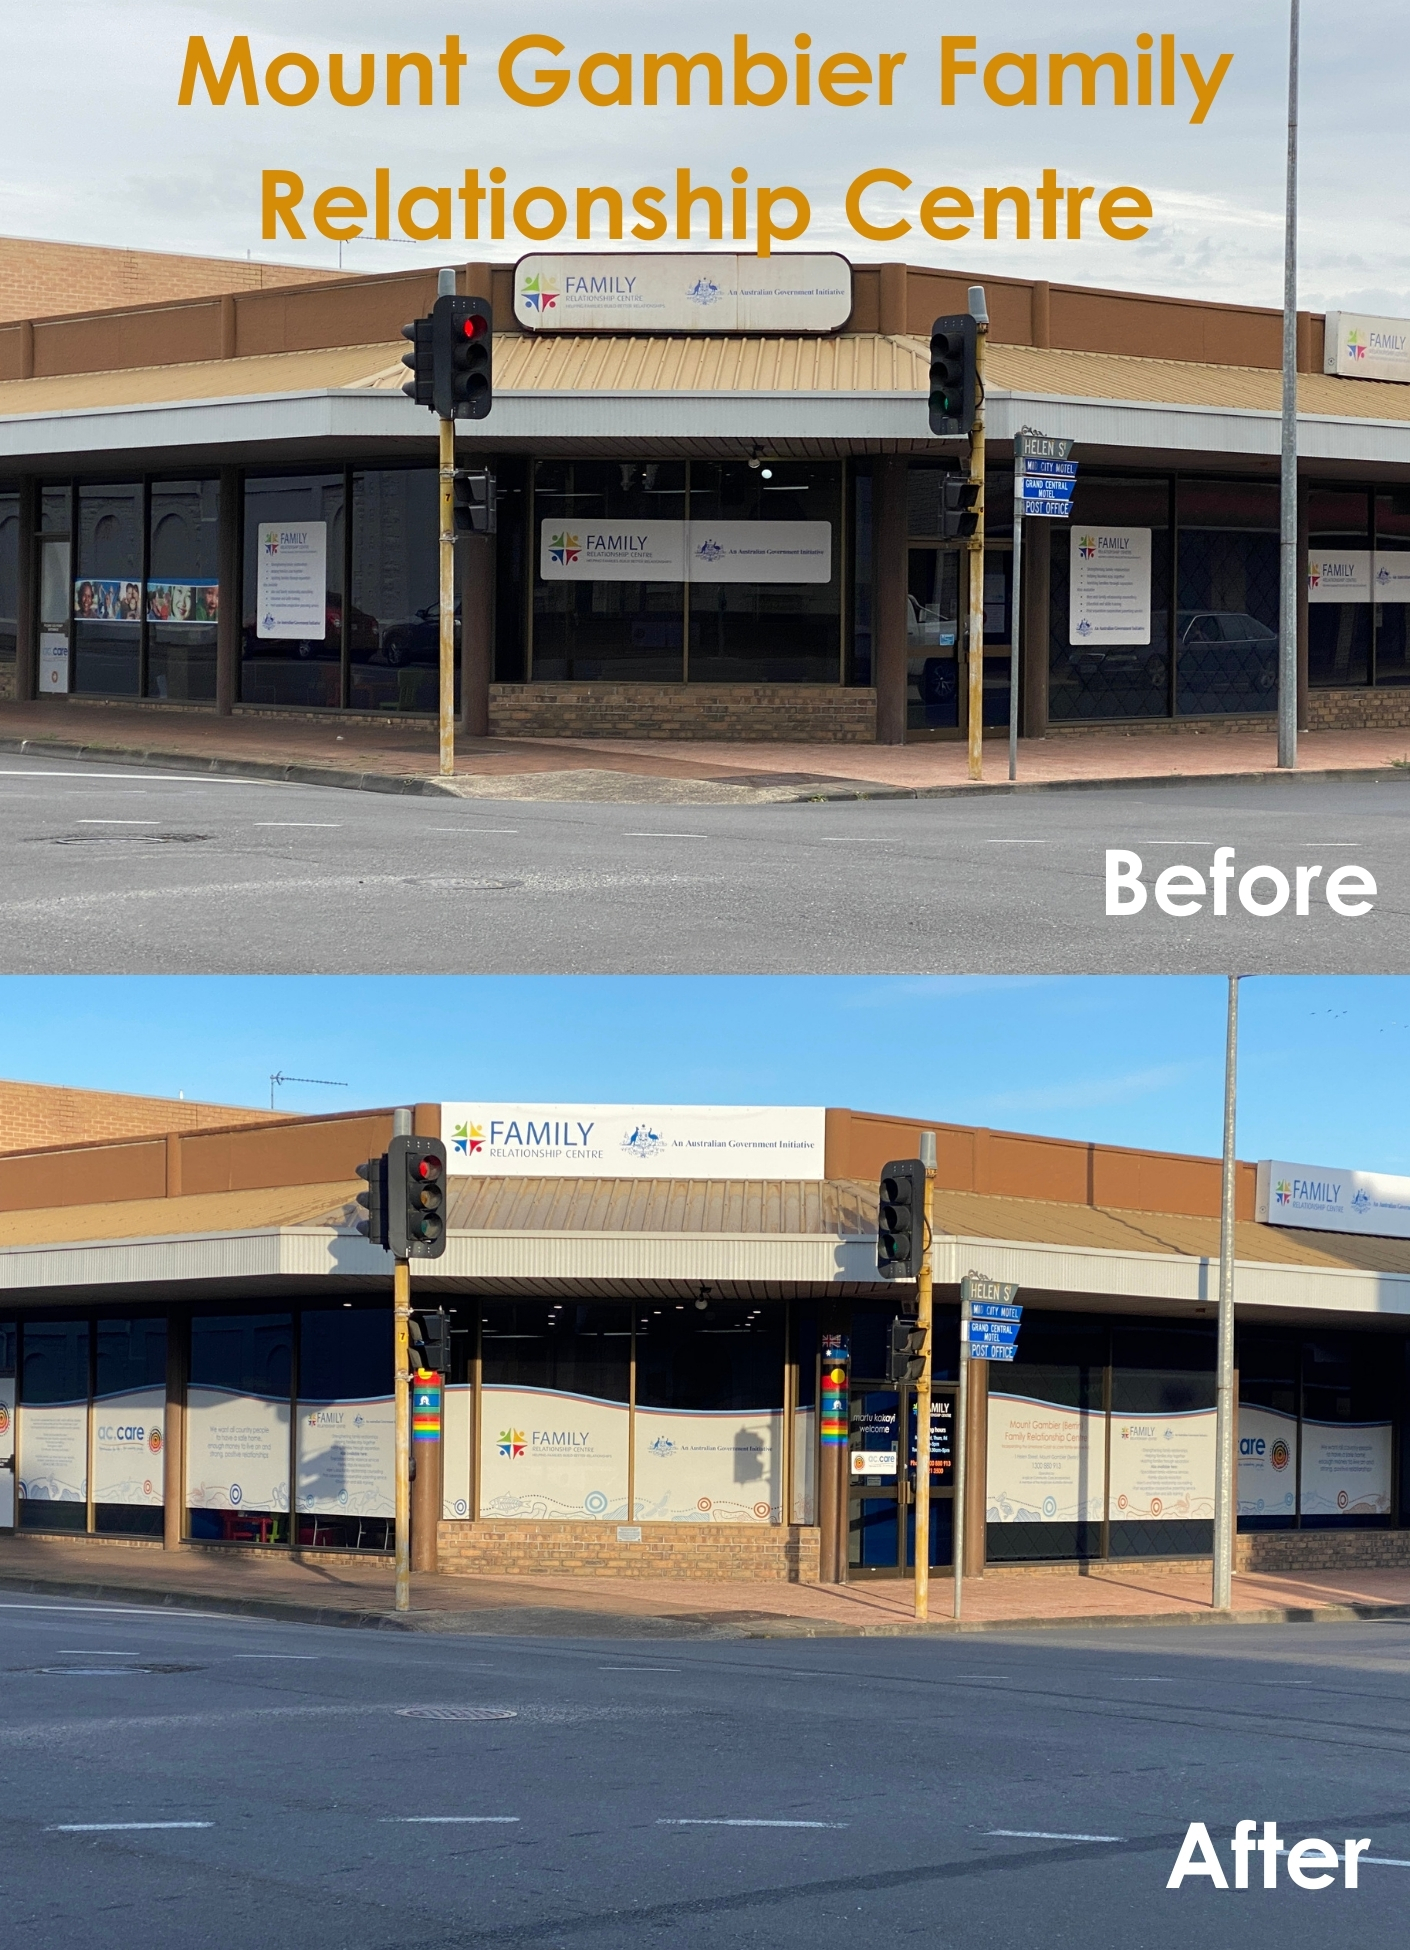 MGFRC before and after front